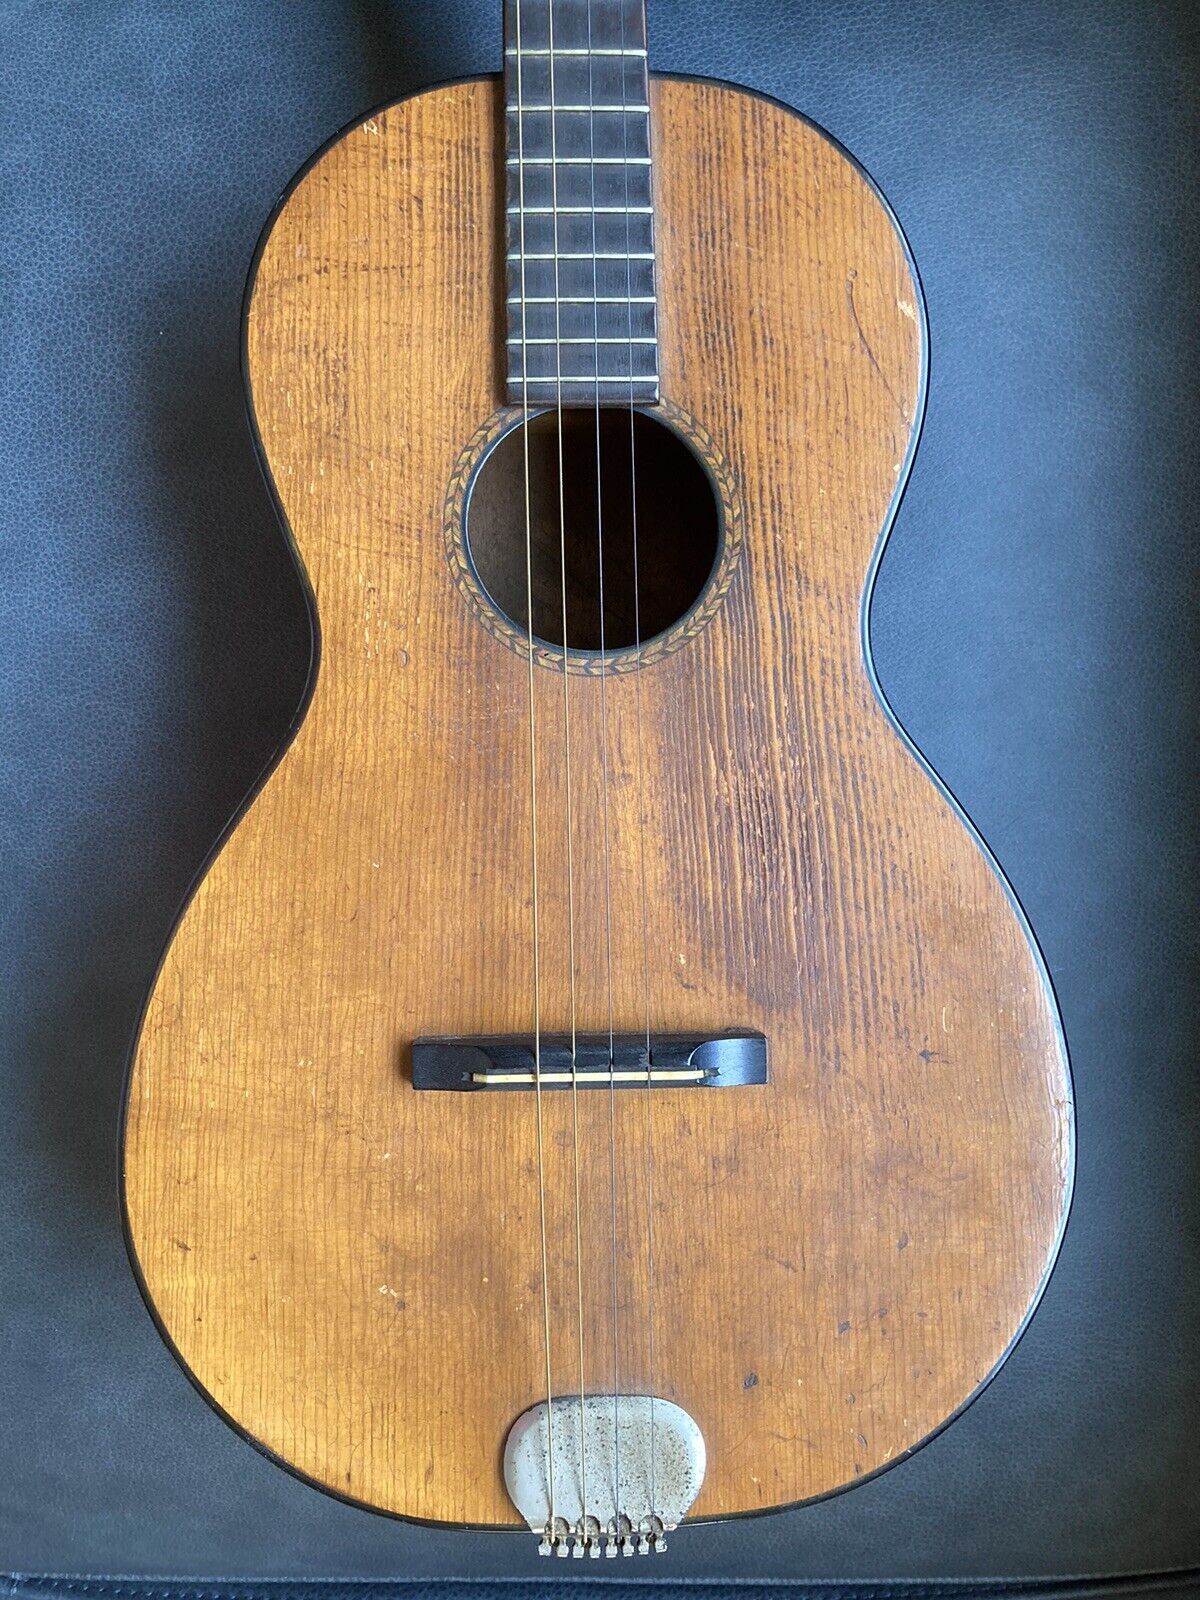 Vtg 1920s 1930s Glee Club by Regal Acoustic 4 String Tenor Guitar Antique 31.5”